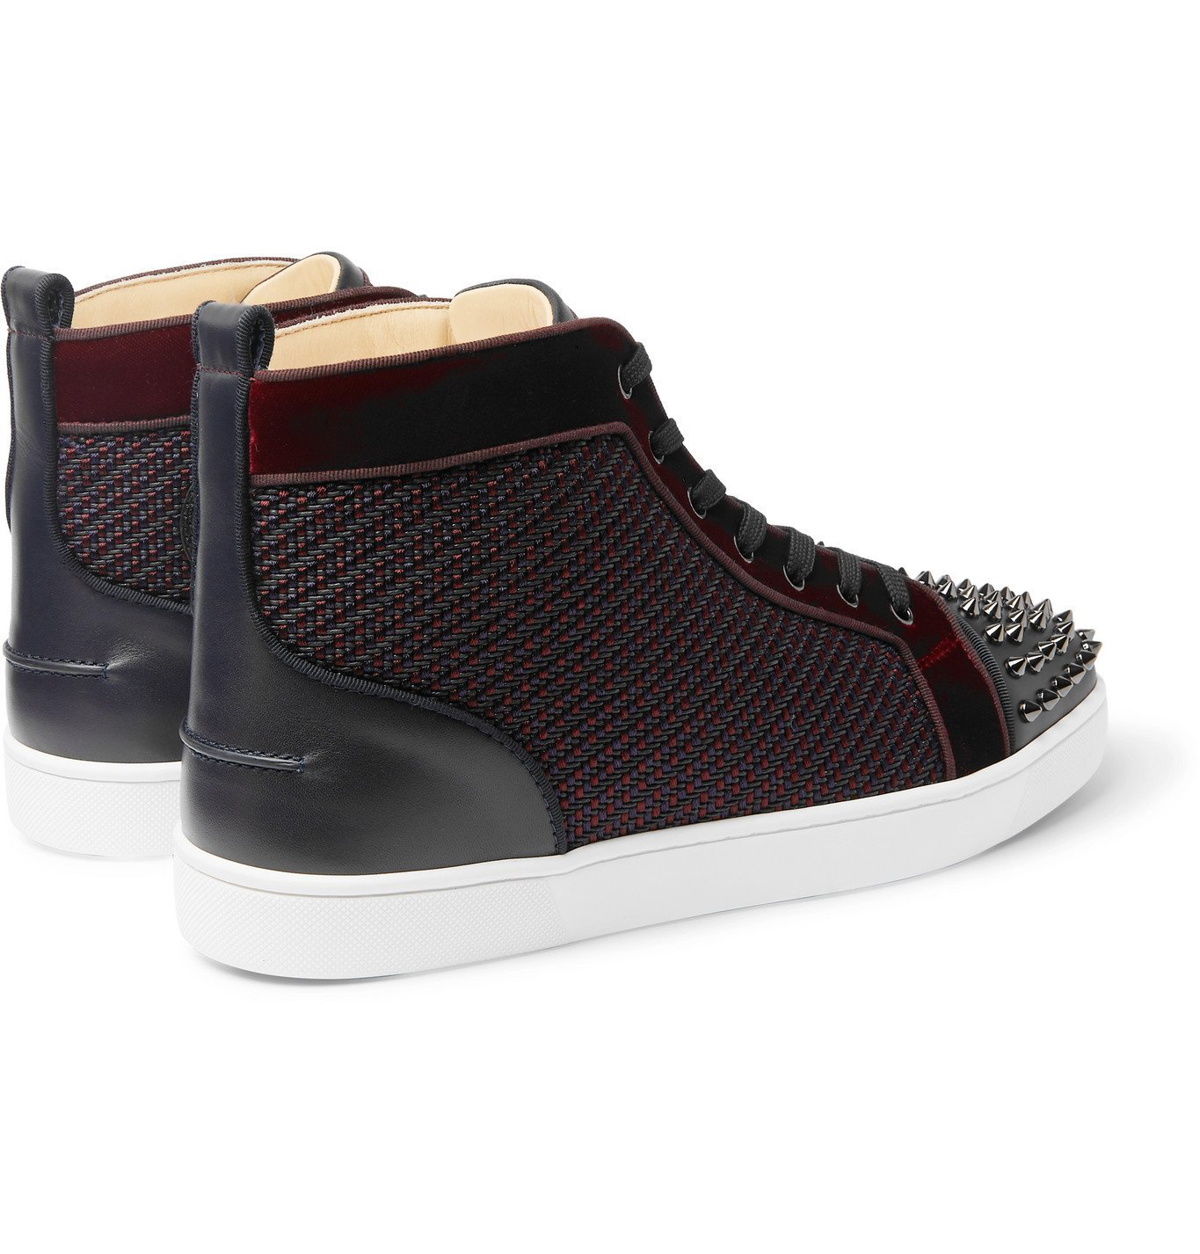 Christian Louboutin Men's Lou Spikes 2 Patent Leather High-Top Sneakers